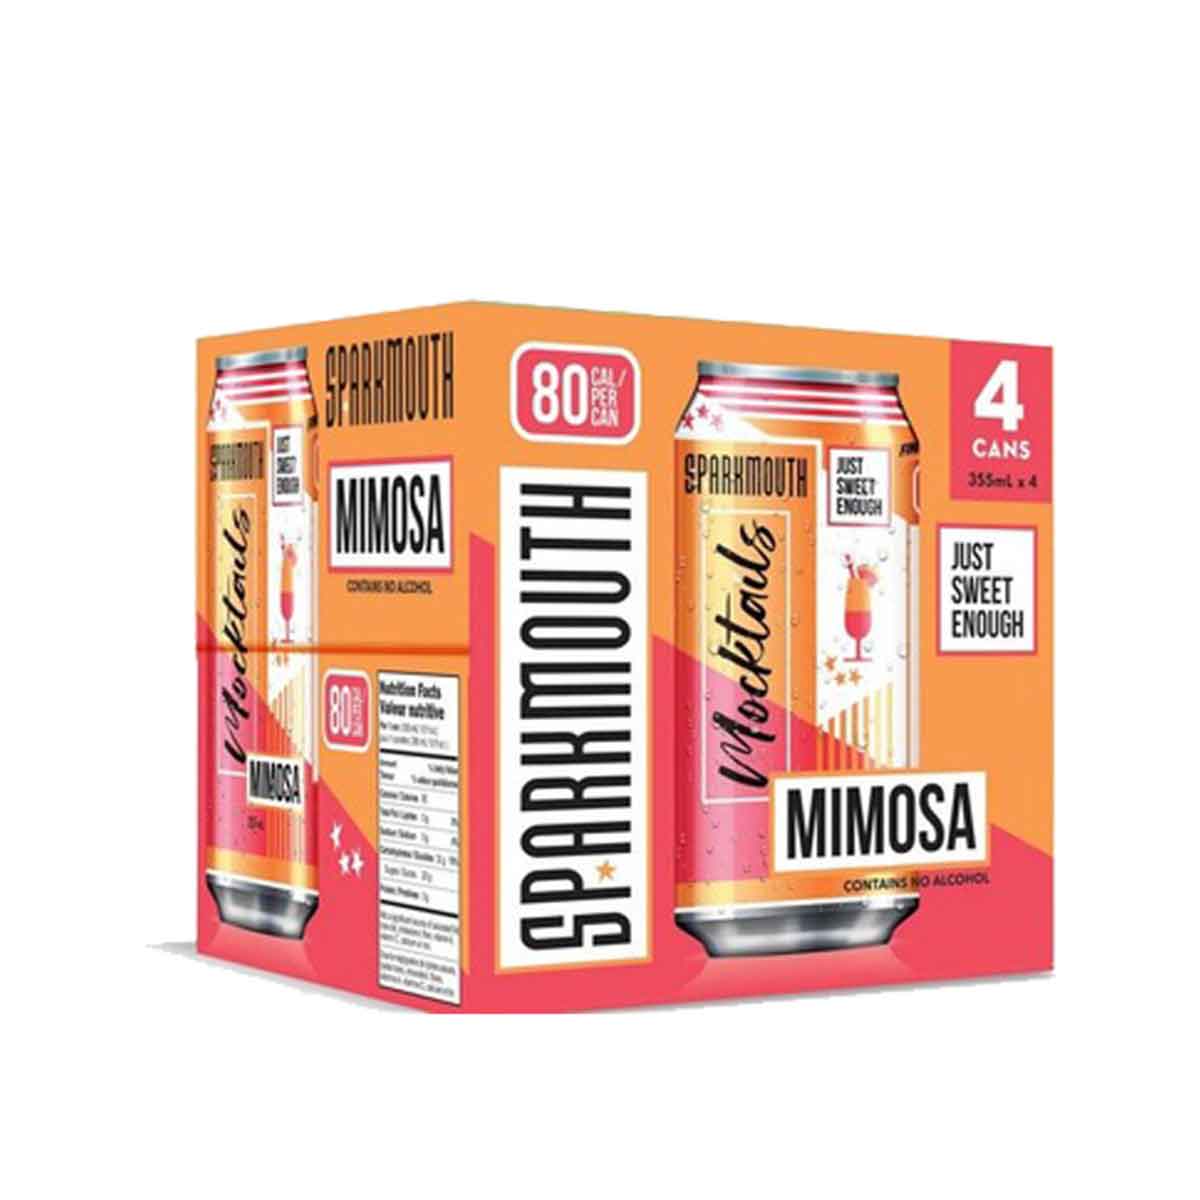 TAG Liquor Stores BC-SPARKMOUTH MIMOSA MOCKTAIL 4 PACK CANS